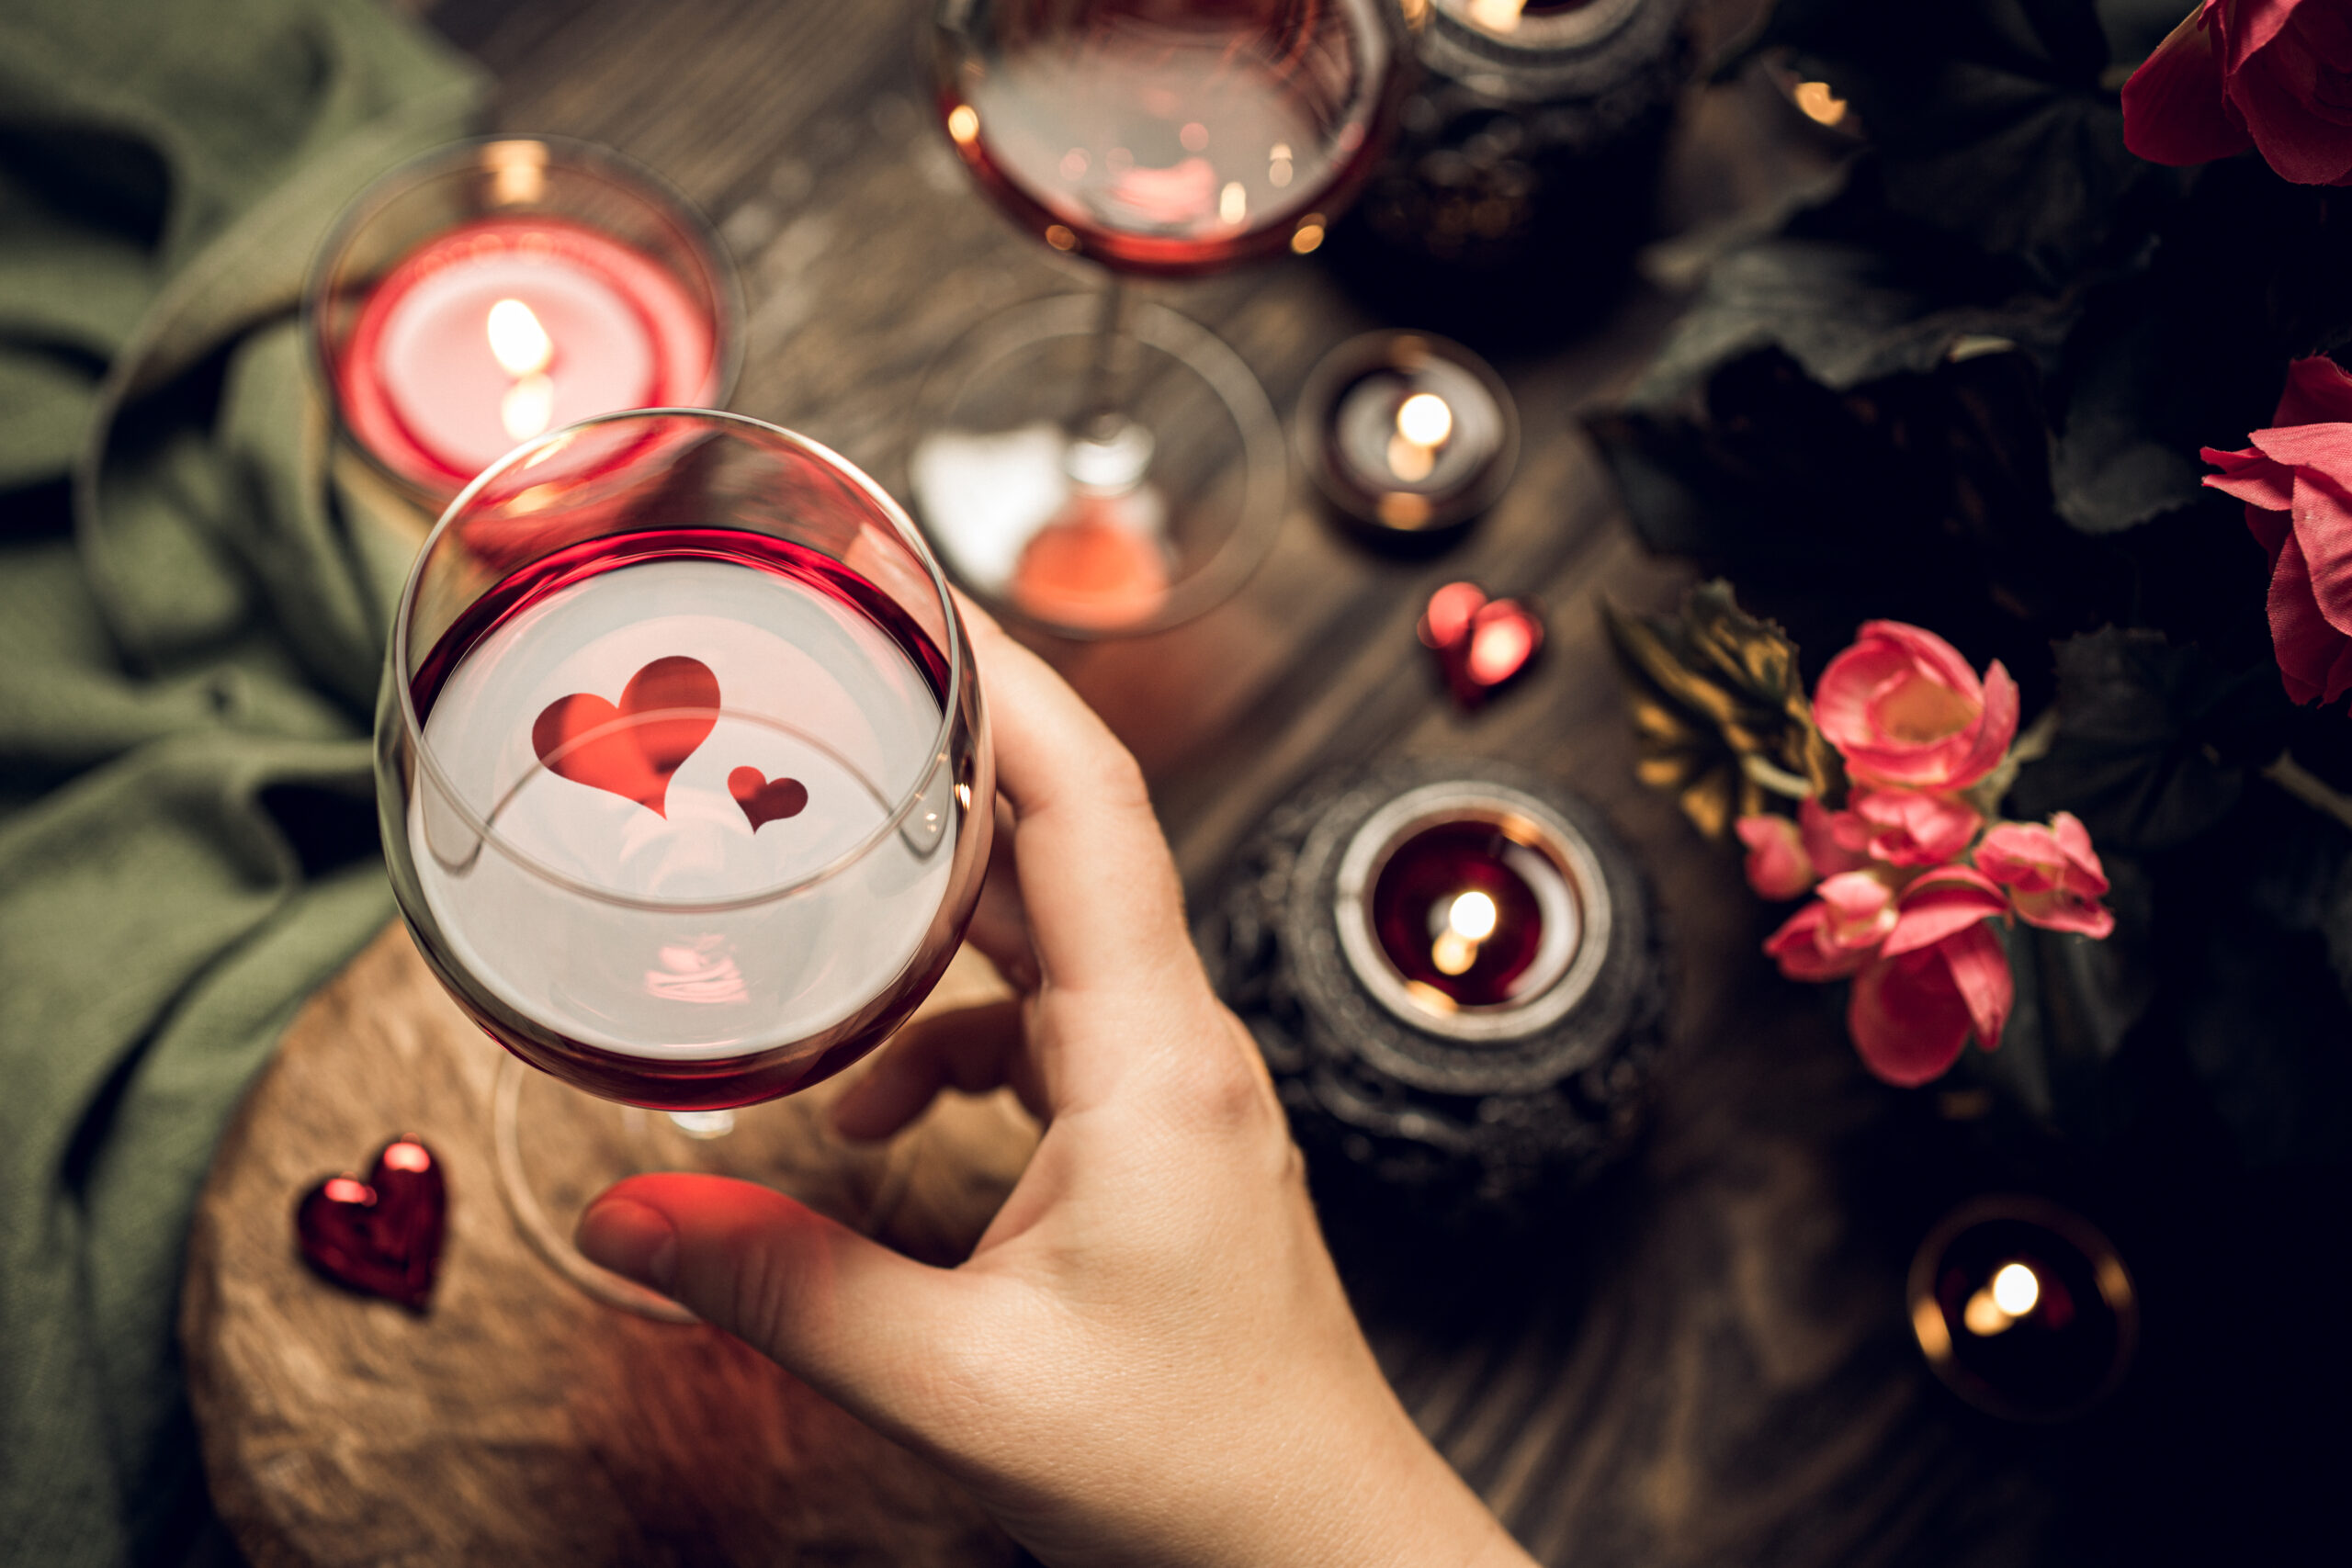 Romantic still life with red wine in glass and candles. Valentine's day concept greetinds card. Heart shape reflected in wine